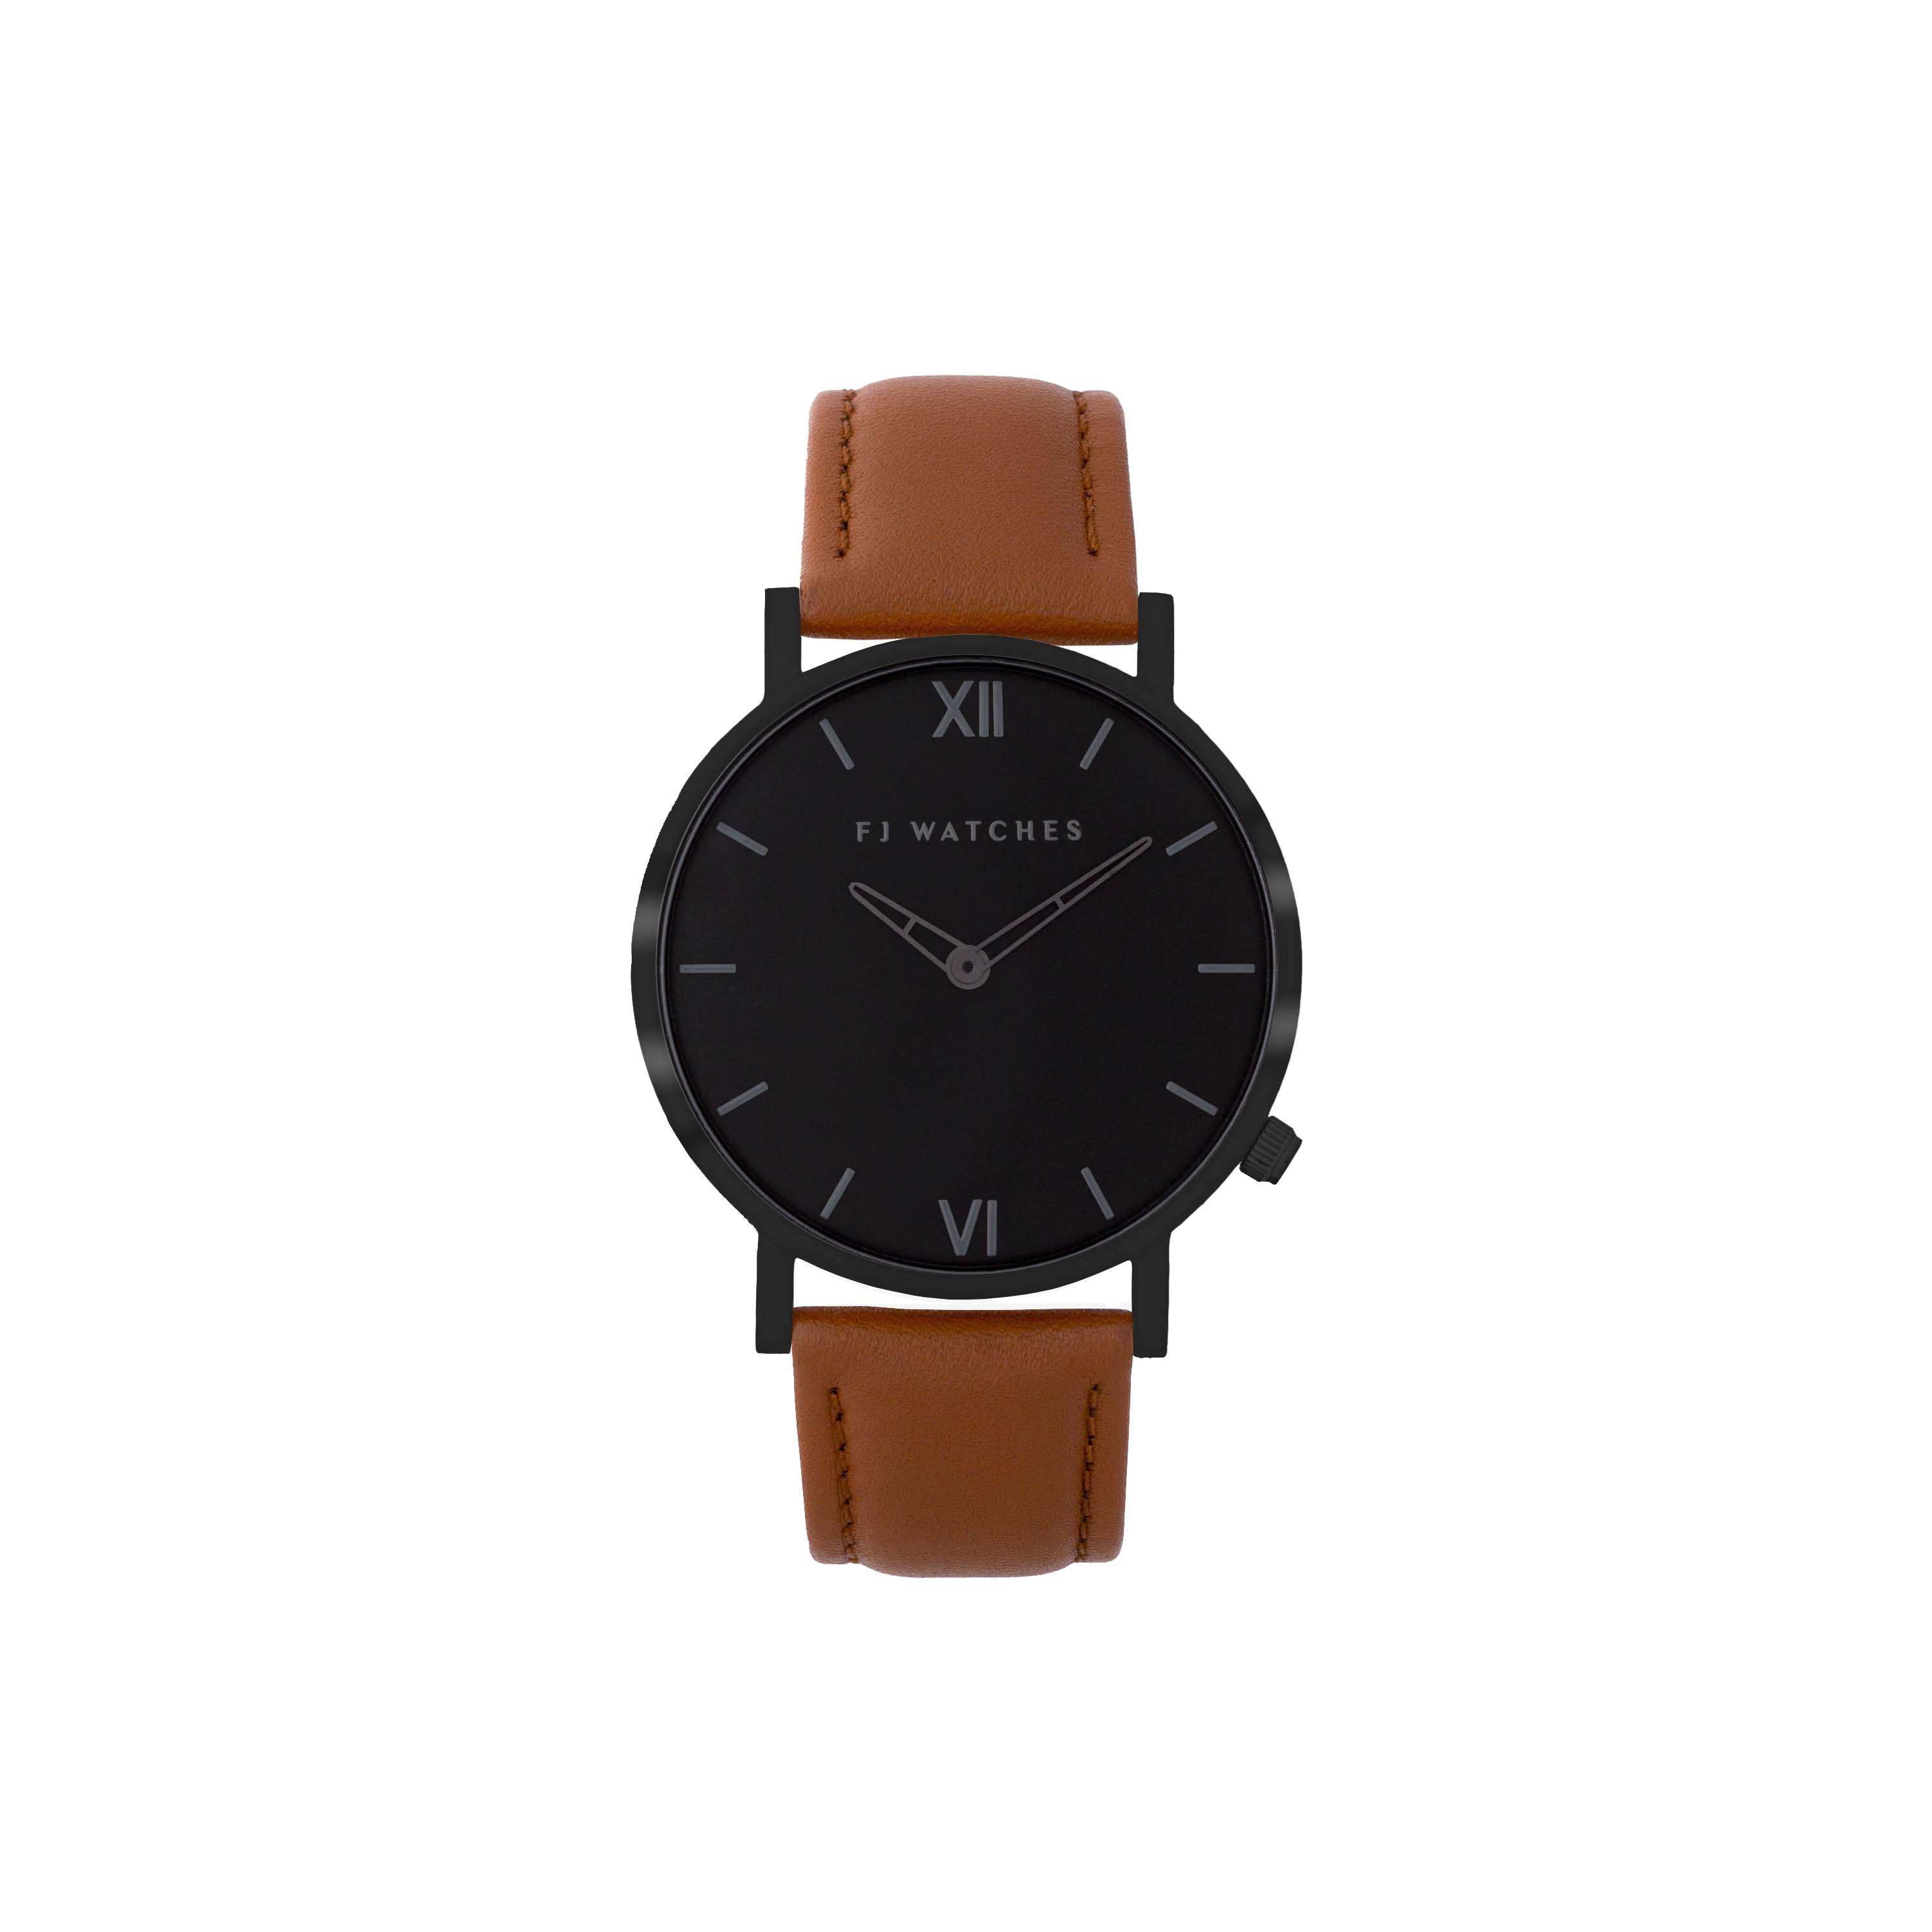 Discover Dark moon, a watch from Five Jwlry for men with an all-black 42 mm dial. This one is offered with a wide variety of leather colors, such as olive green, tan or black!